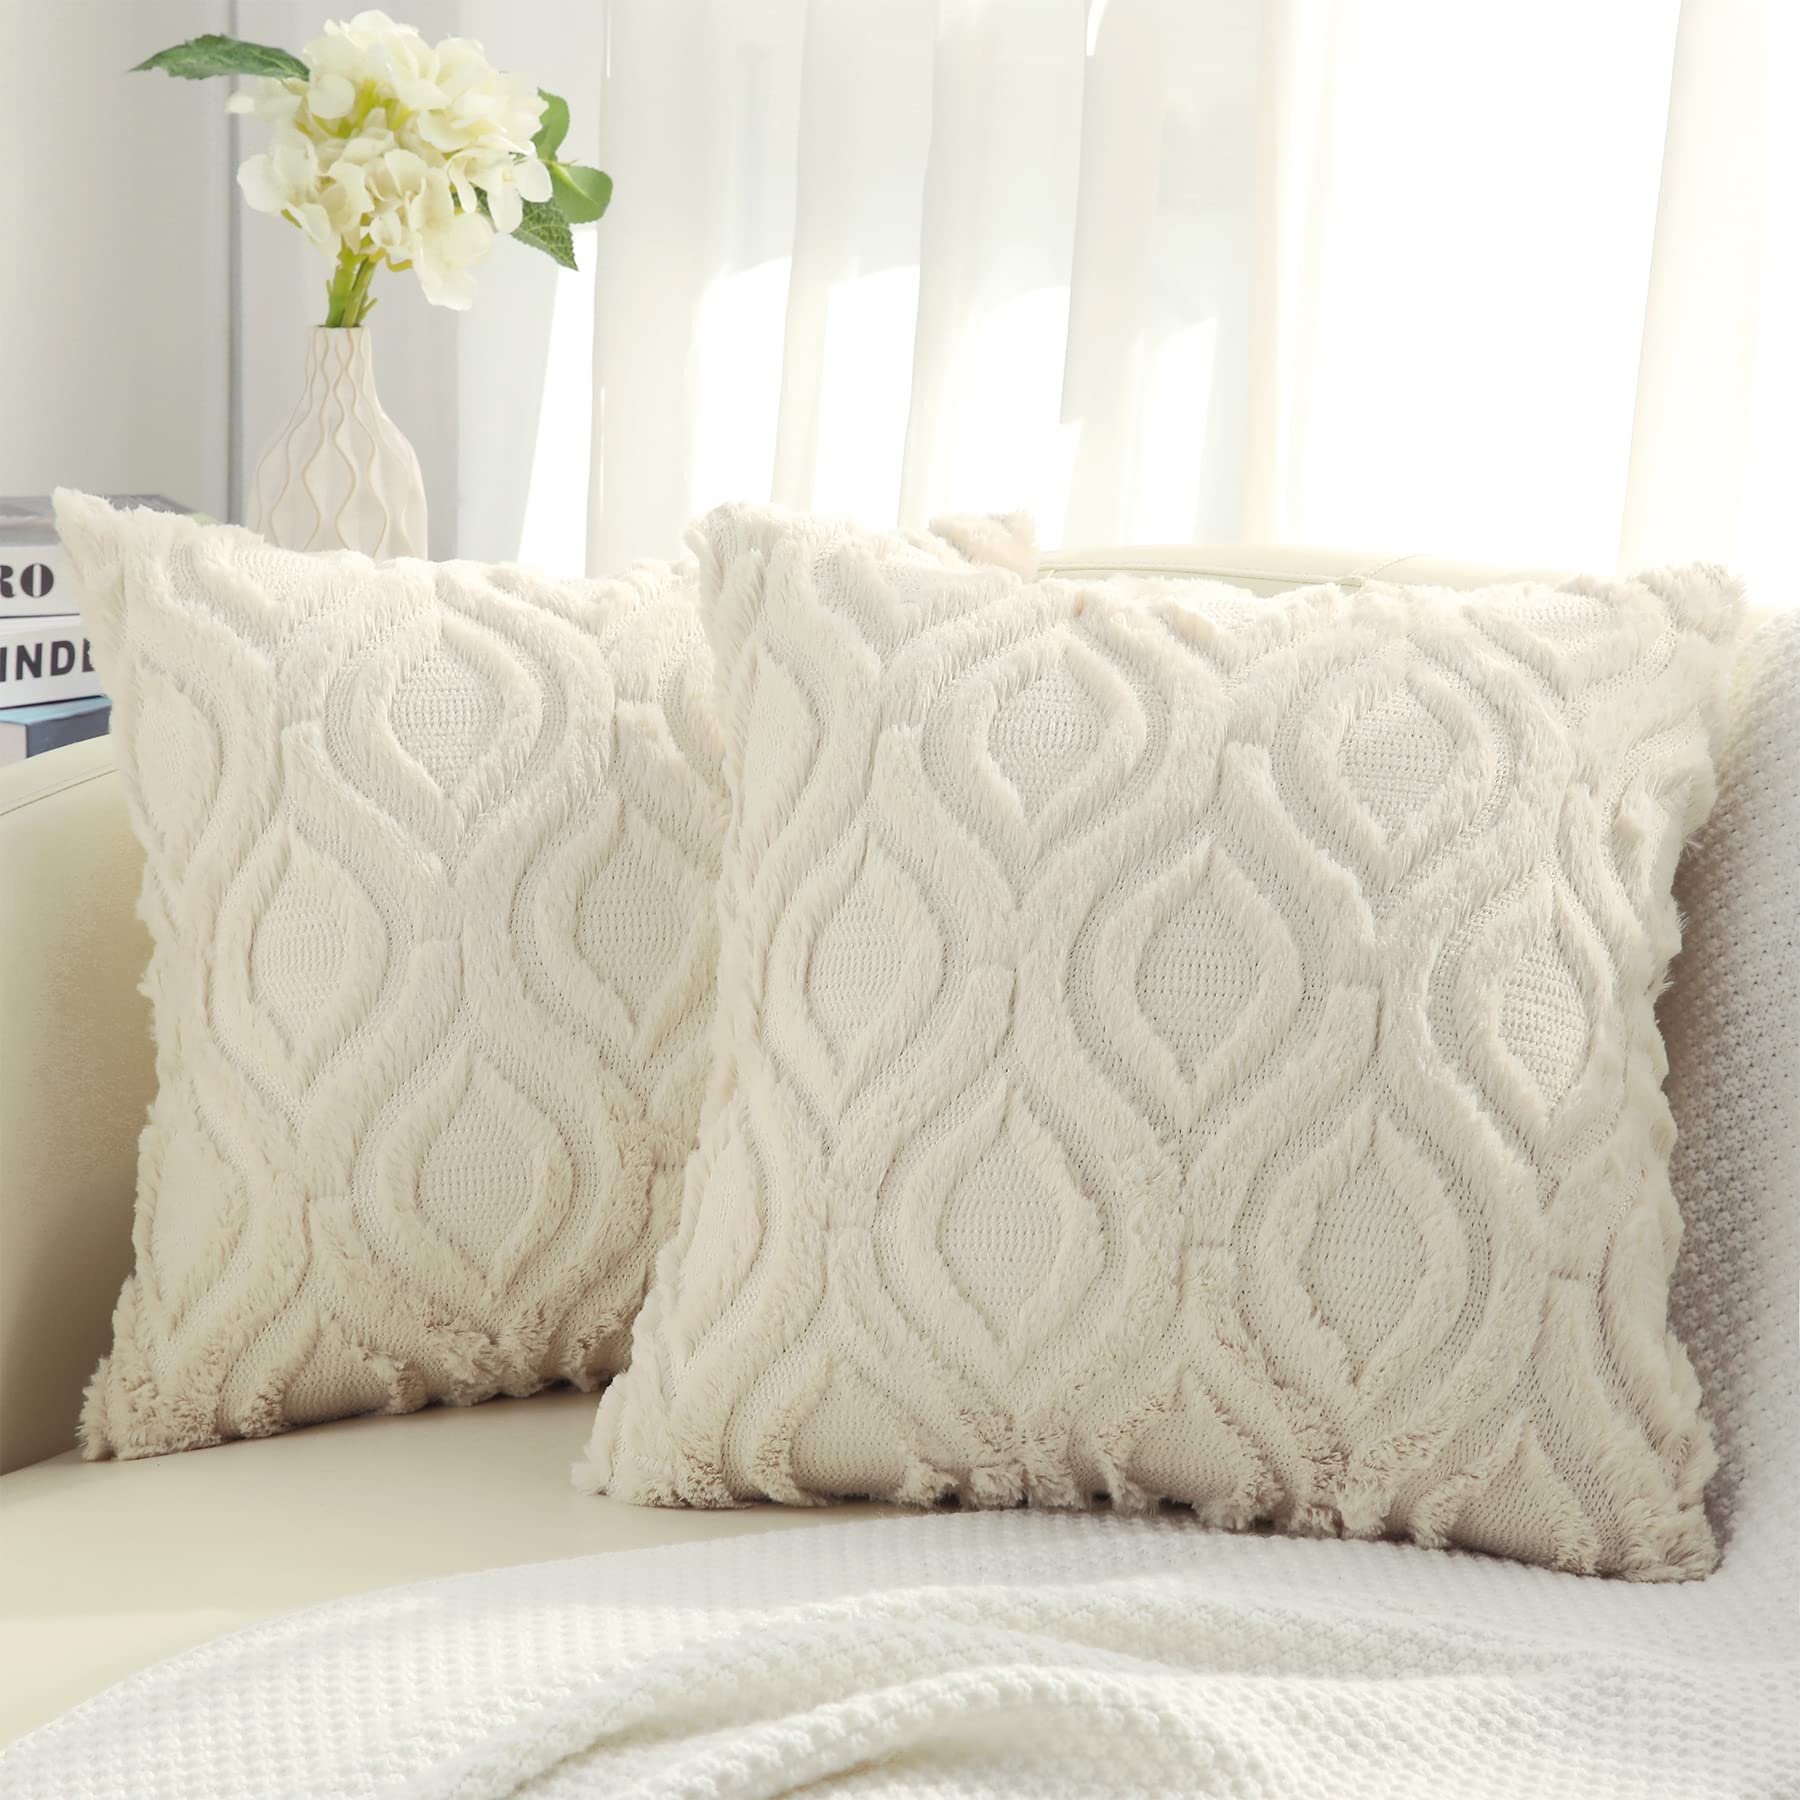 Polyester Wool Black & Off White Hand Loom Woven 20x20 Inches Decorative Cushion Cover Boho Throw Pillow Cover Outdoor Pillow PET